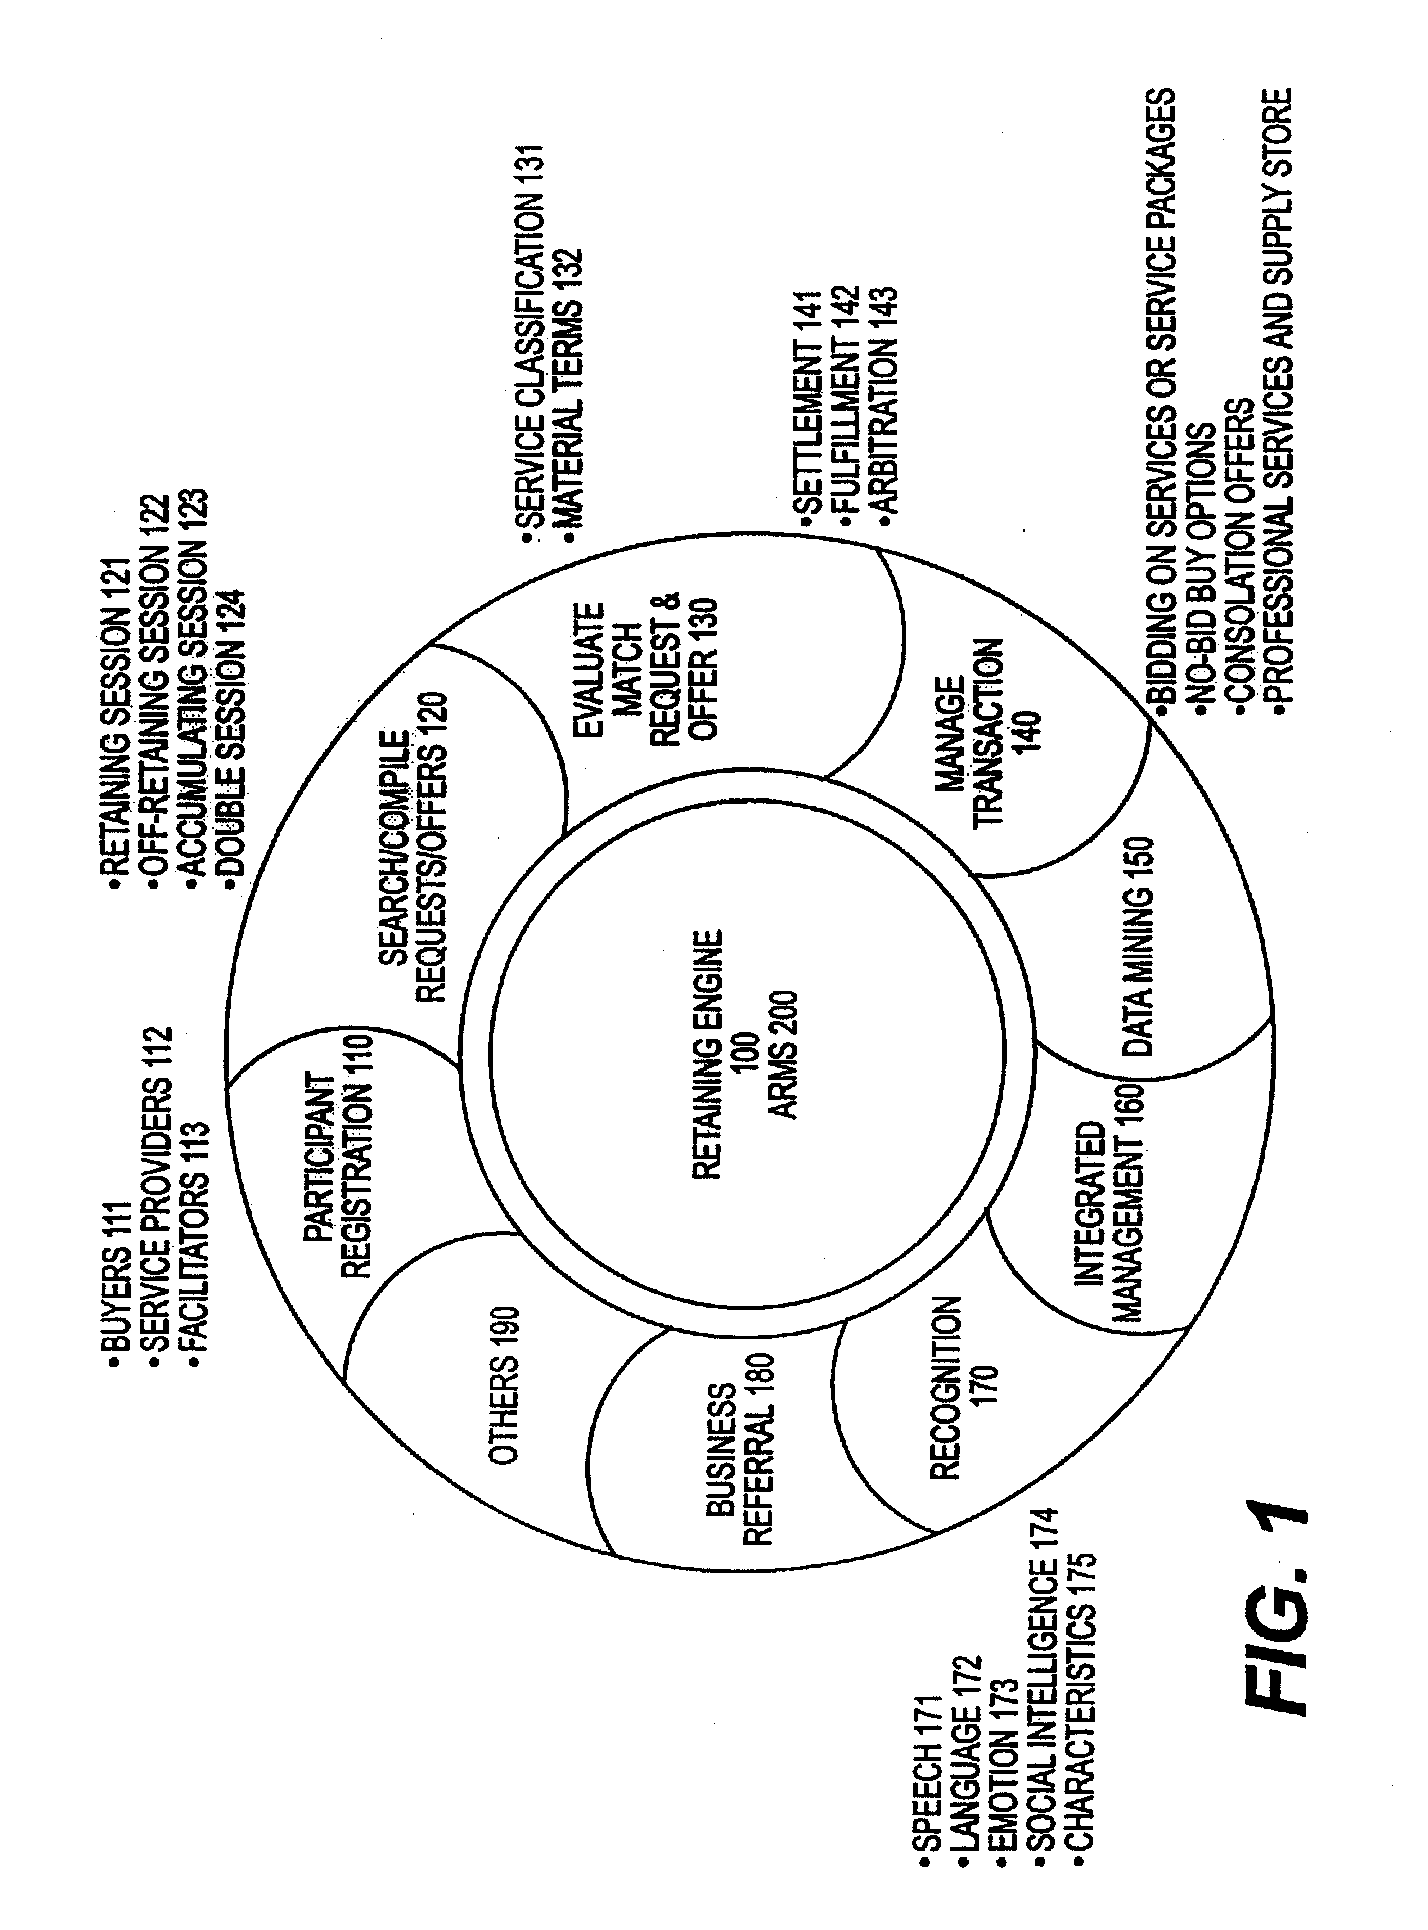 Method and system for facilitating service transactions